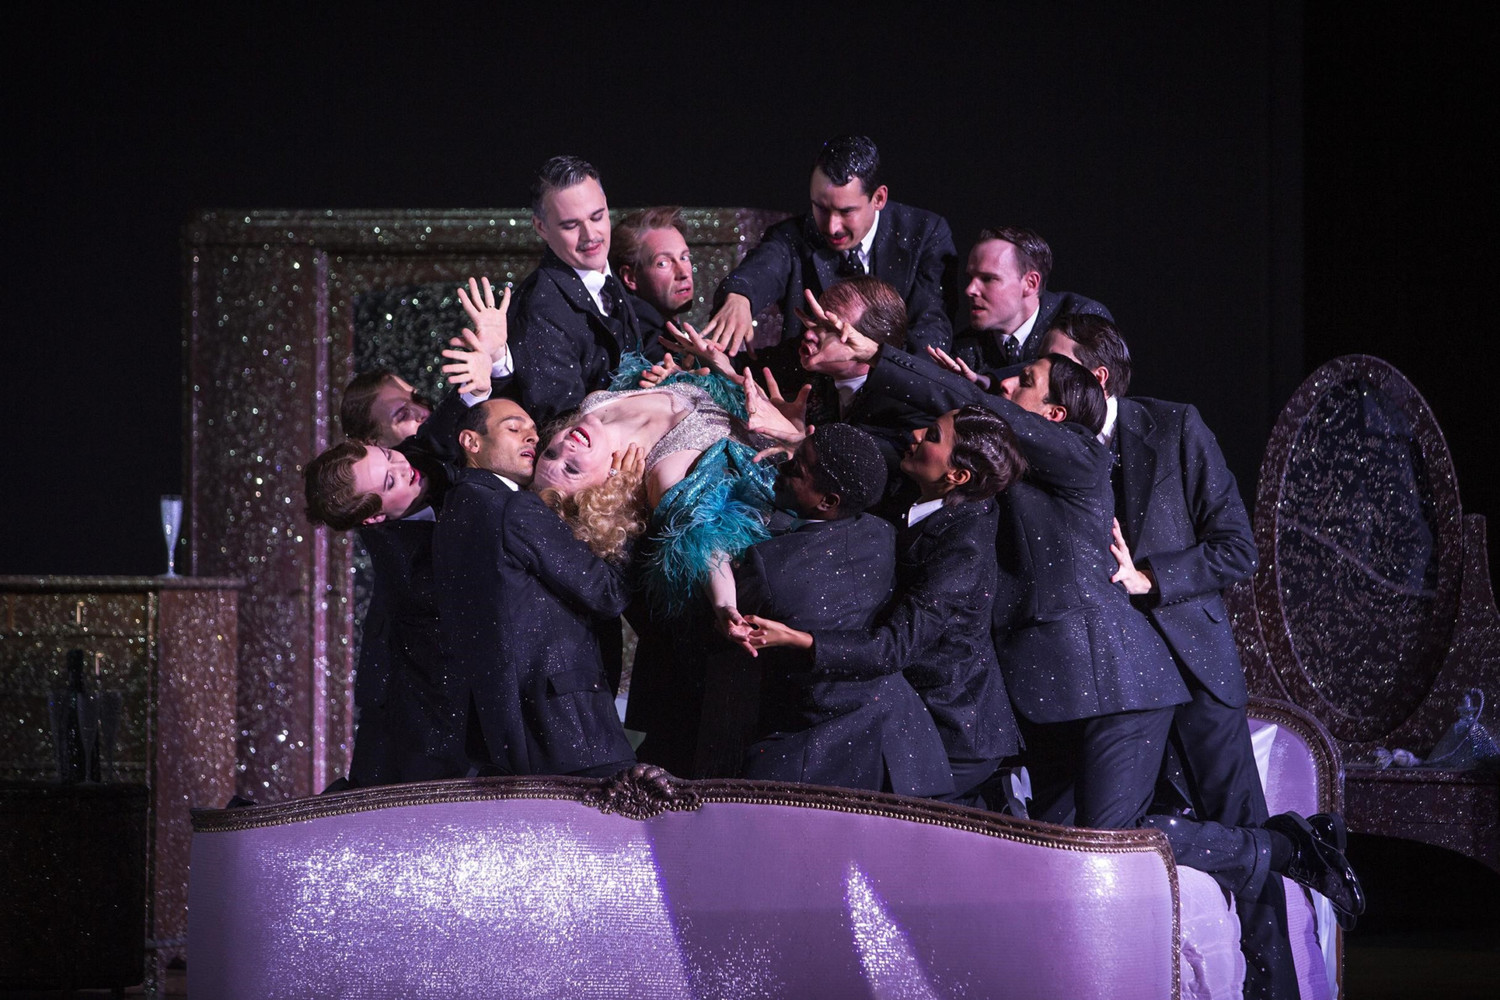 Review: DIE TOTE STADT at Komische Oper Berlin - A Miscast, Misjudged, Major Disappointment 